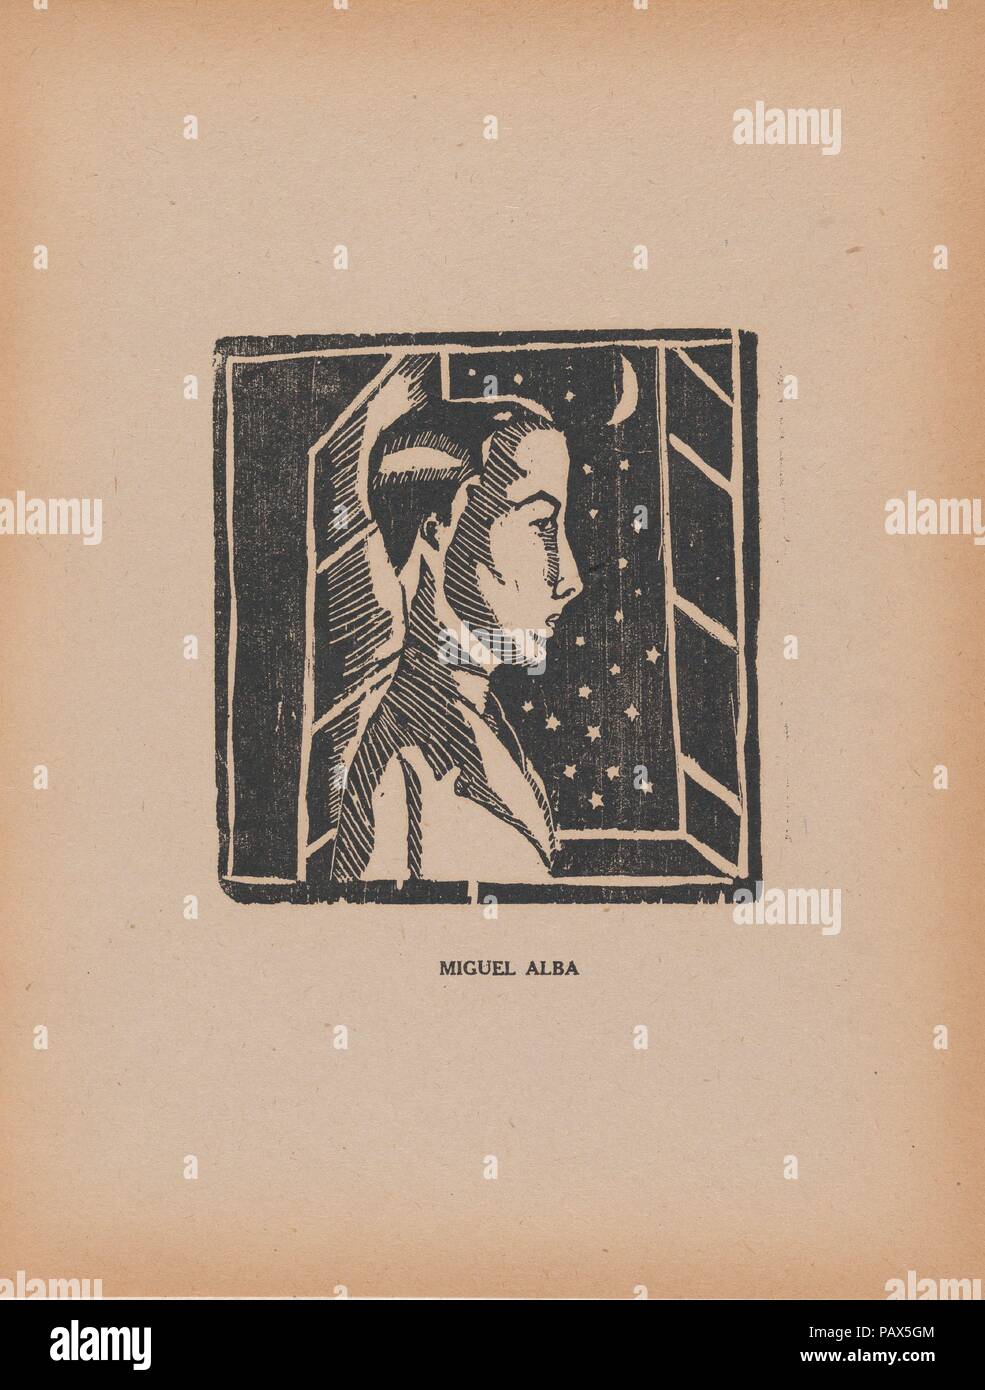 A young man facing right standing before a window through which we see stars and the moon, from the portfolio 'Los pequeños grabadores en madera, alumnos de la Escuela Preparatoria de Jalisco' (Guadalajara, Mexico 1925). Artist: Miguel Alba (Mexican, active 1920s). Dimensions: Sheet: 11 11/16 × 8 15/16 in. (29.7 × 22.7 cm)  Image: 5 1/8 × 4 15/16 in. (13 × 12.5 cm). Date: ca. 1924.  See comment for 29.101.19. Museum: Metropolitan Museum of Art, New York, USA. Stock Photo